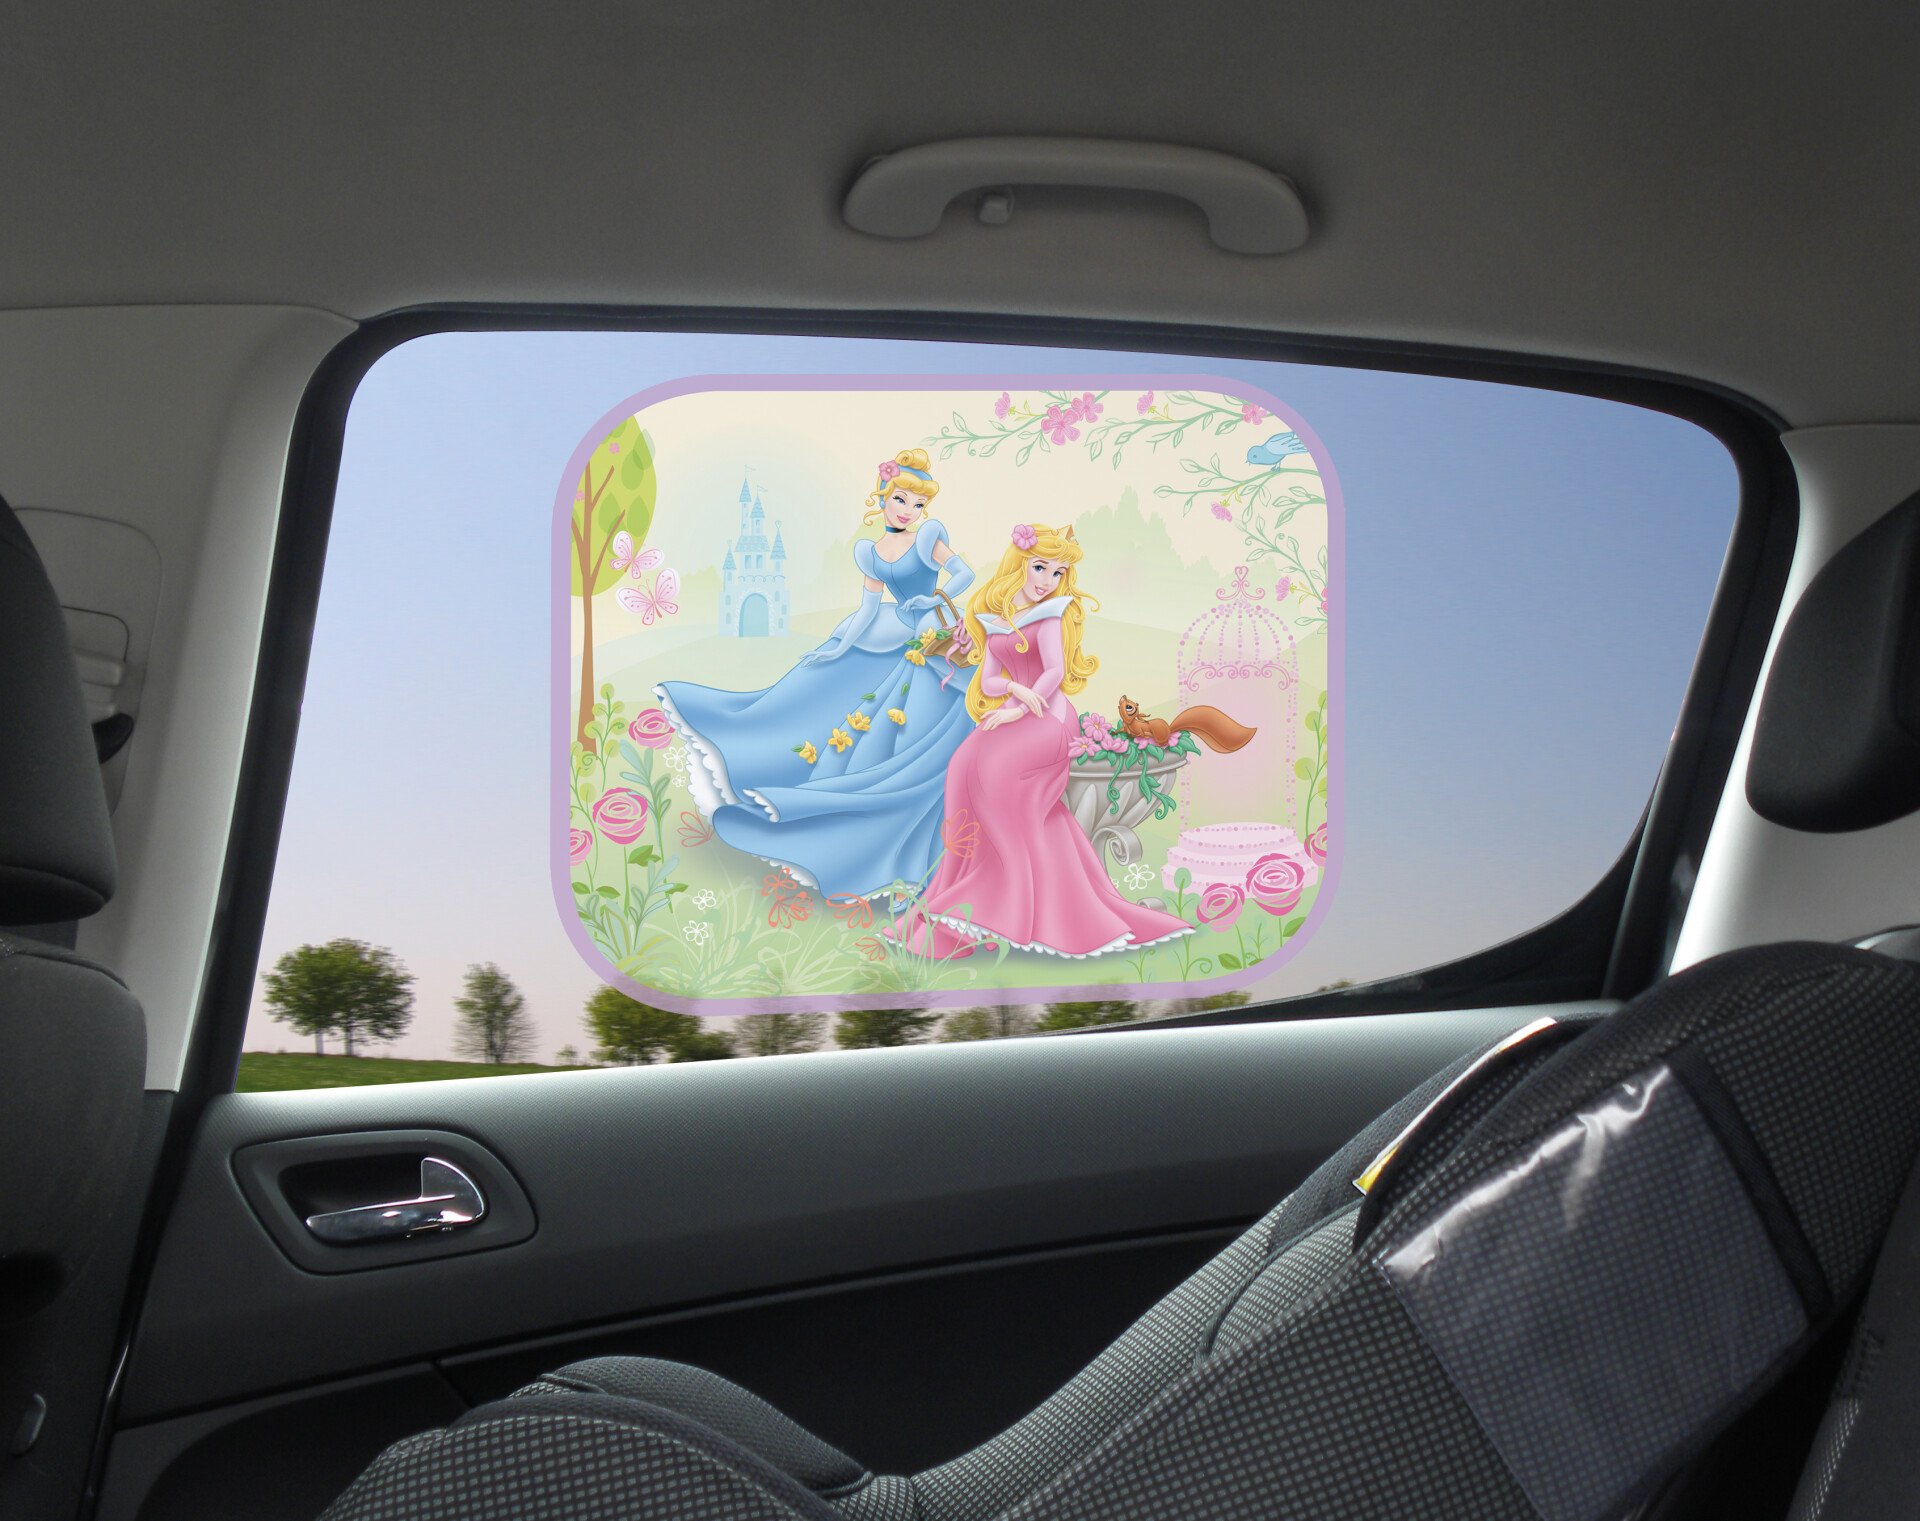 Disney side sunshades with suction cups 2pcs -Pricess Cinderella 1 thumb